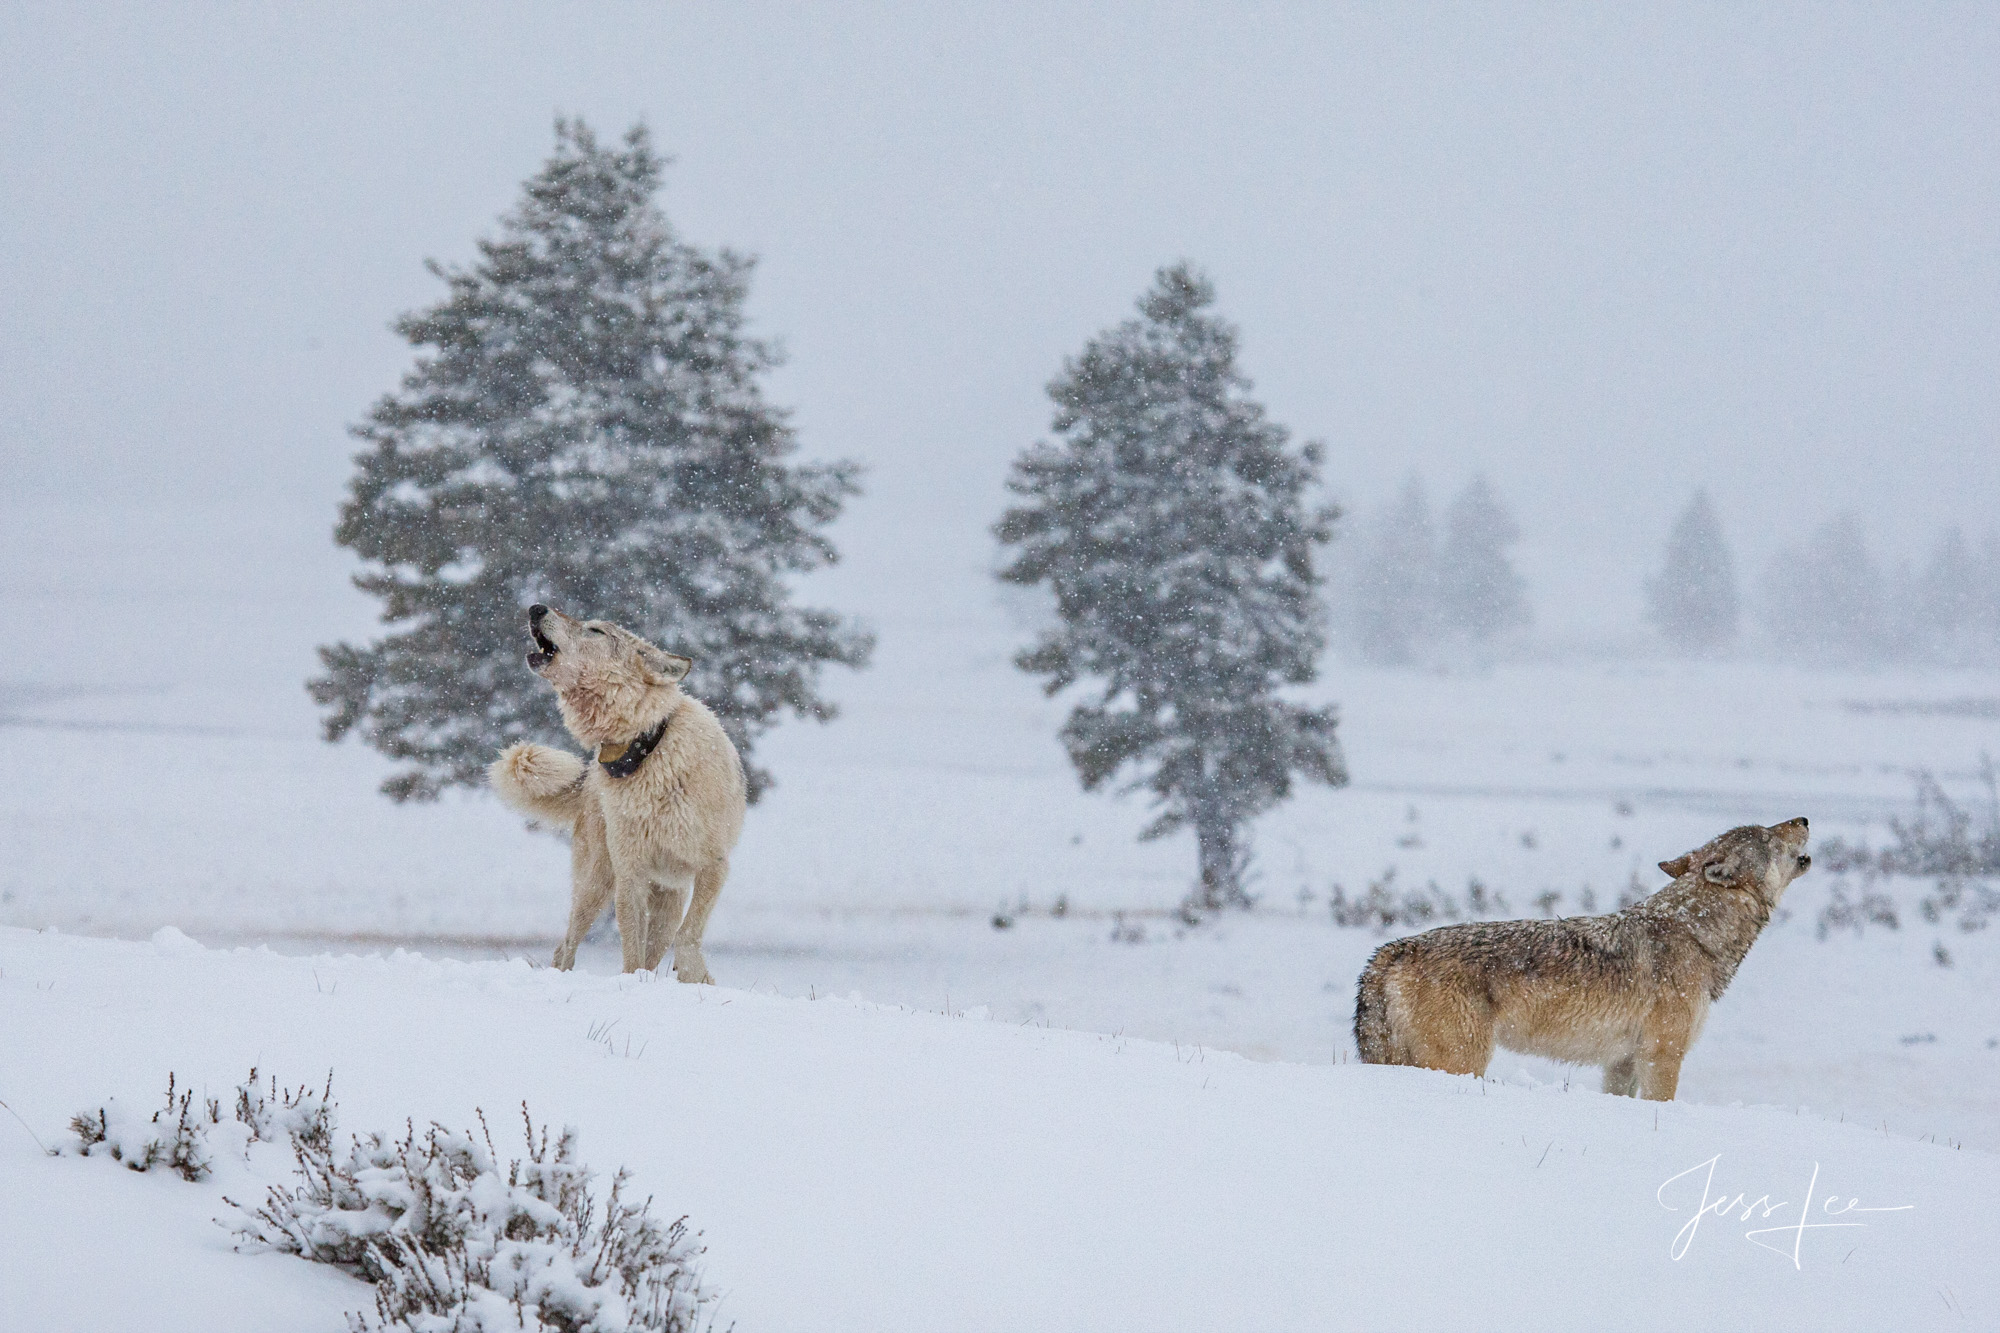 Yellowstone Wolves howling for the pack in the Wild. Exclusive limited edition photo of 200 prints by Jess Lee